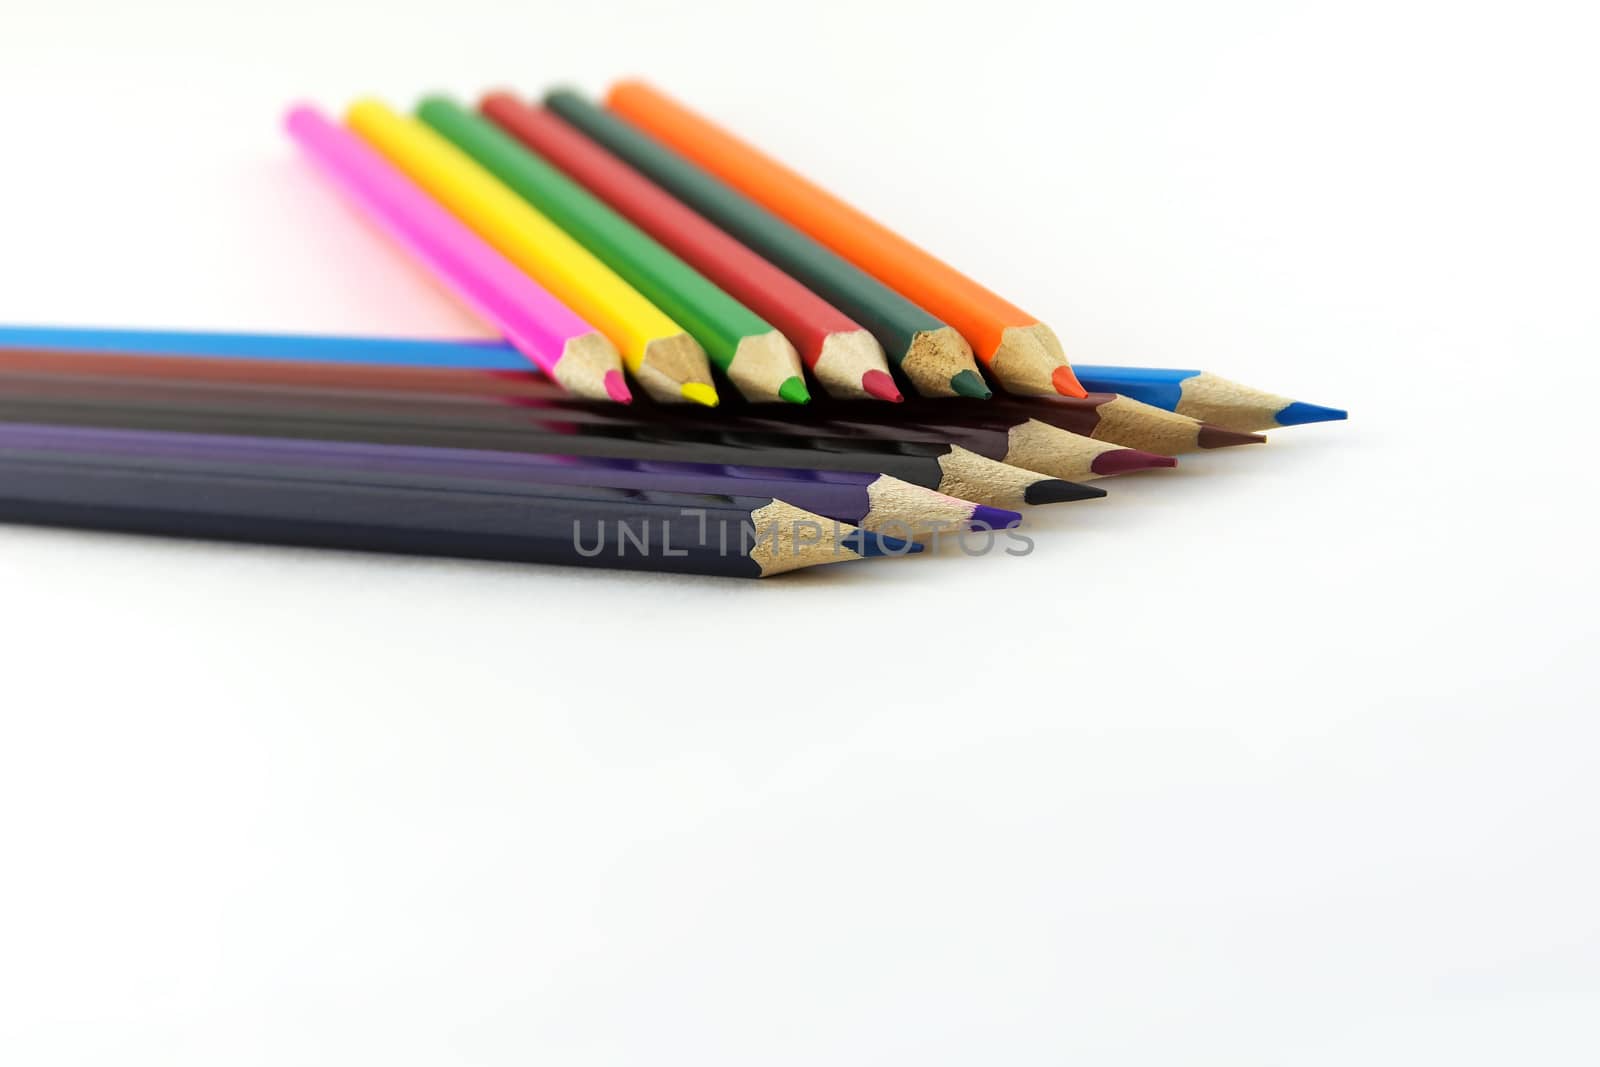 On the bright surface is a set of color pencils for drawing